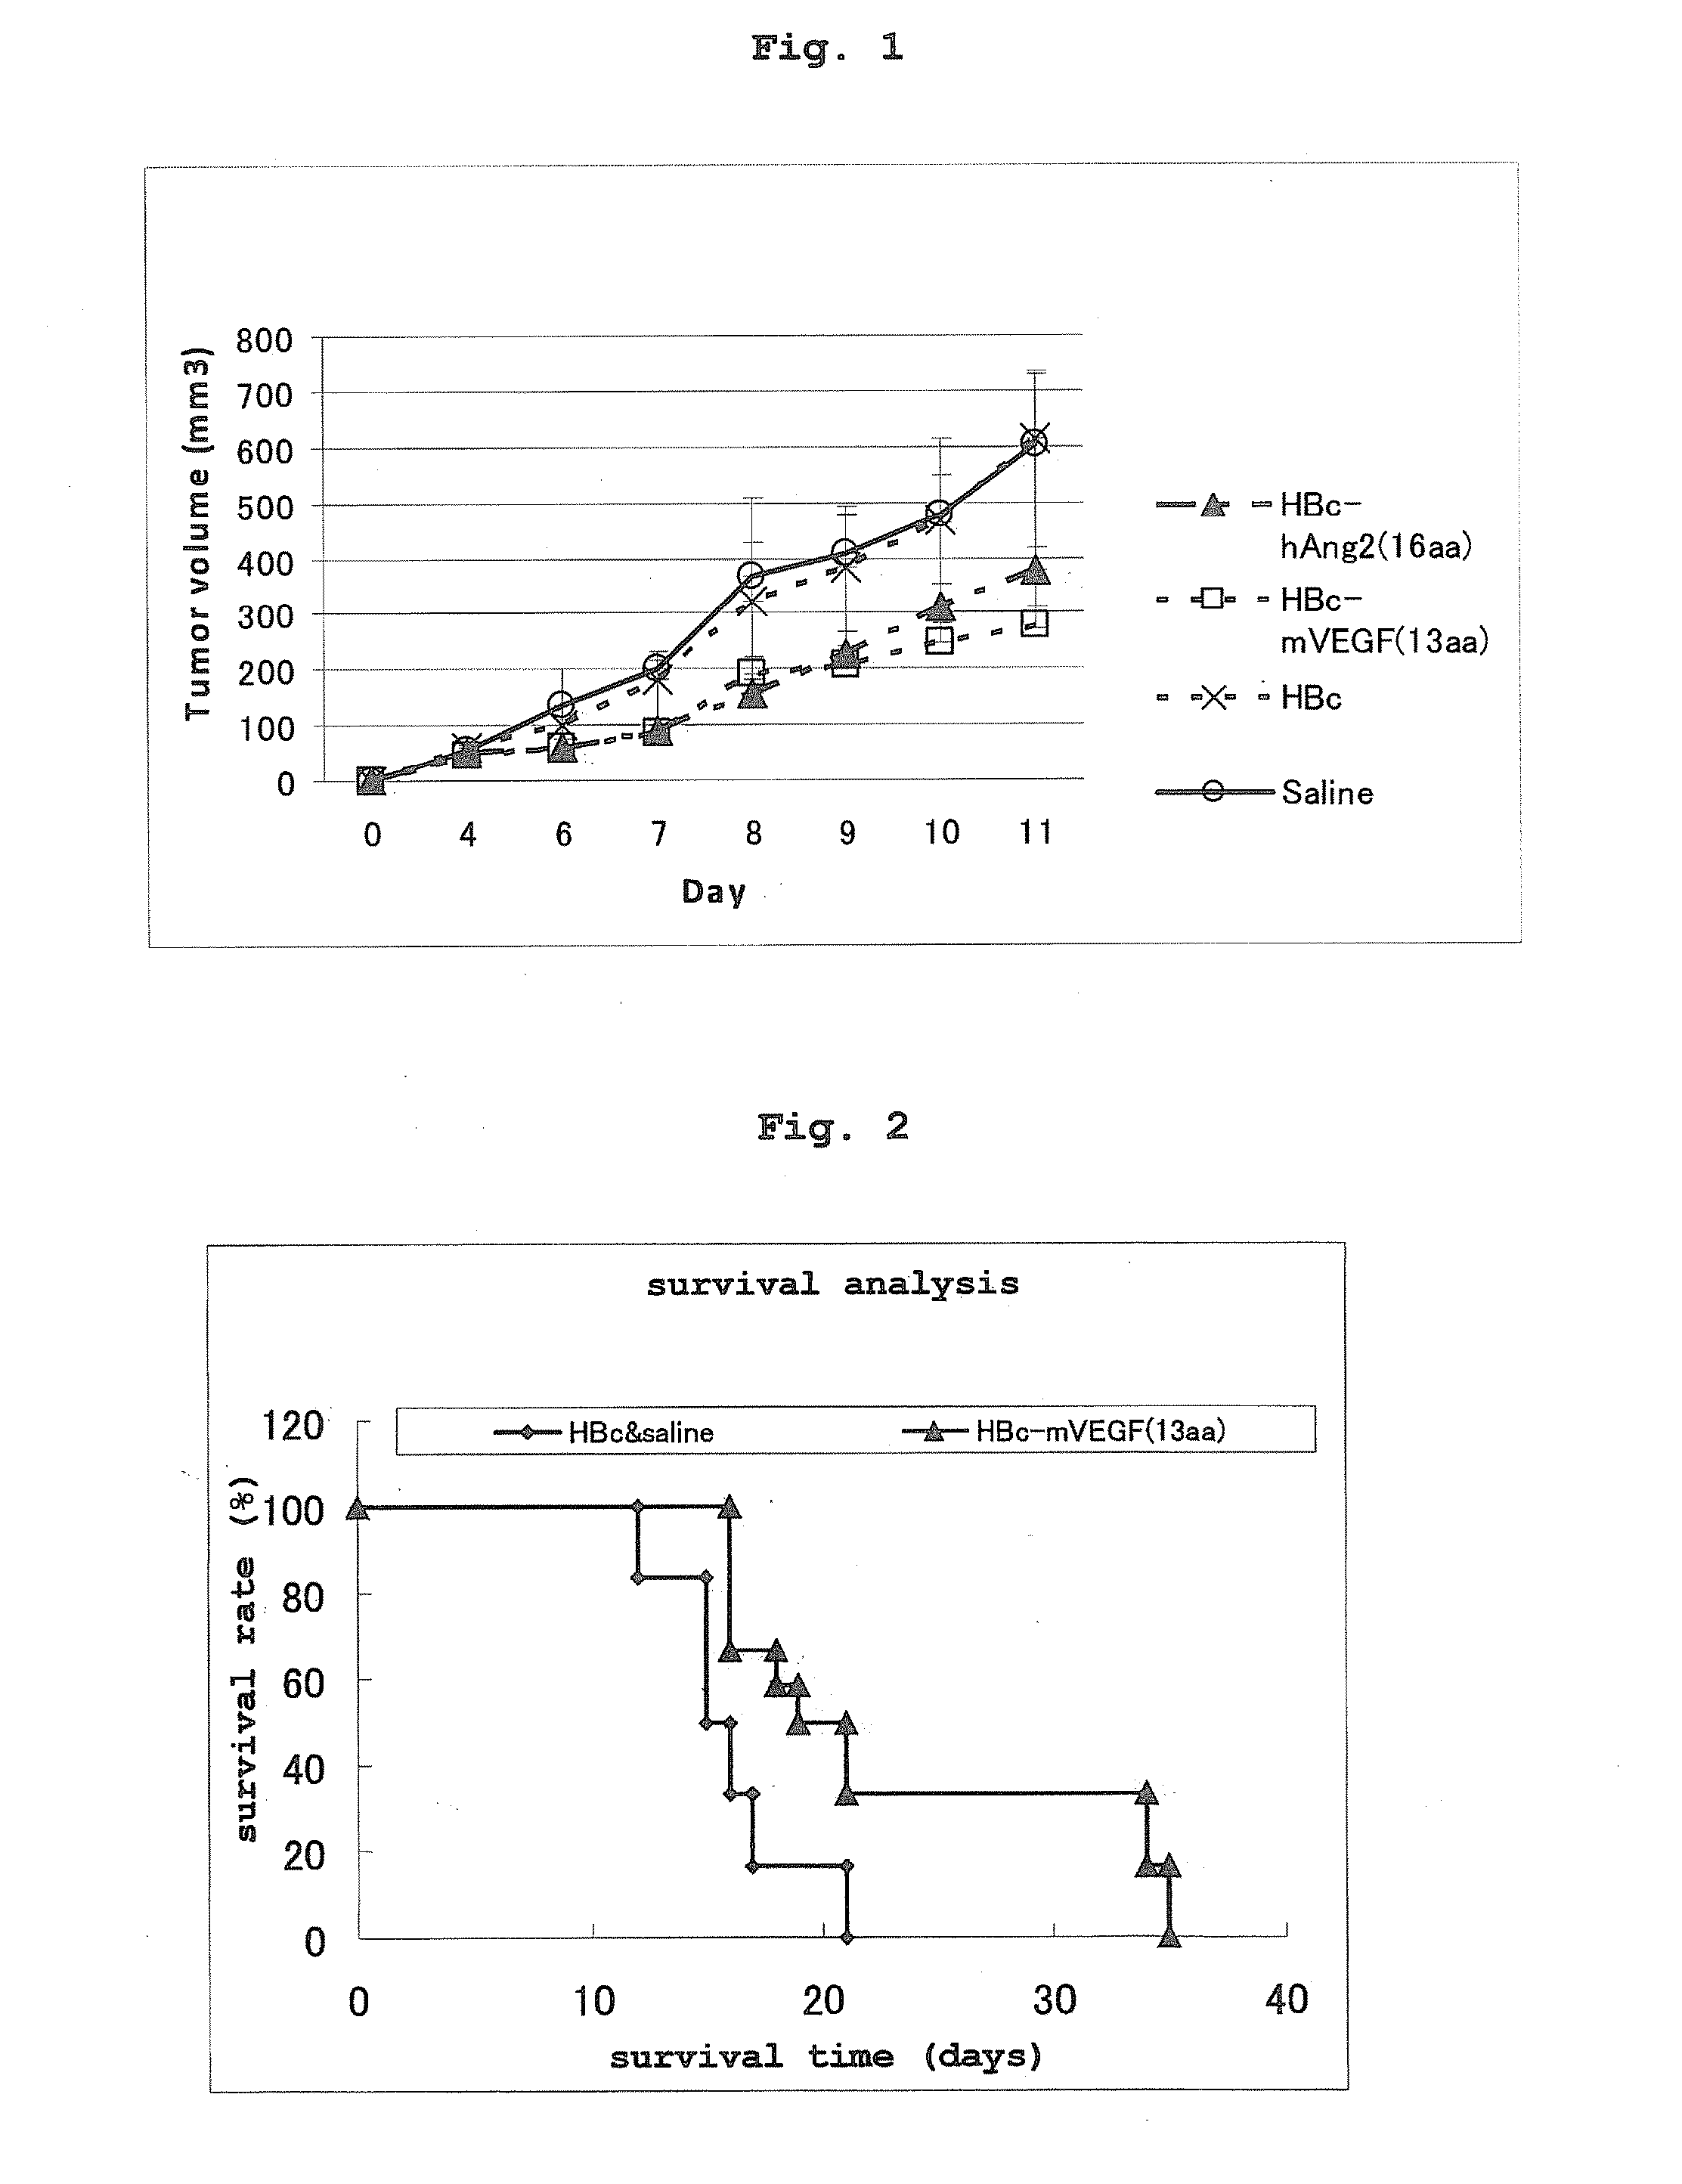 DNA vaccine containing vegf-specific epitope and/or angiopoietin-2-specific epitope